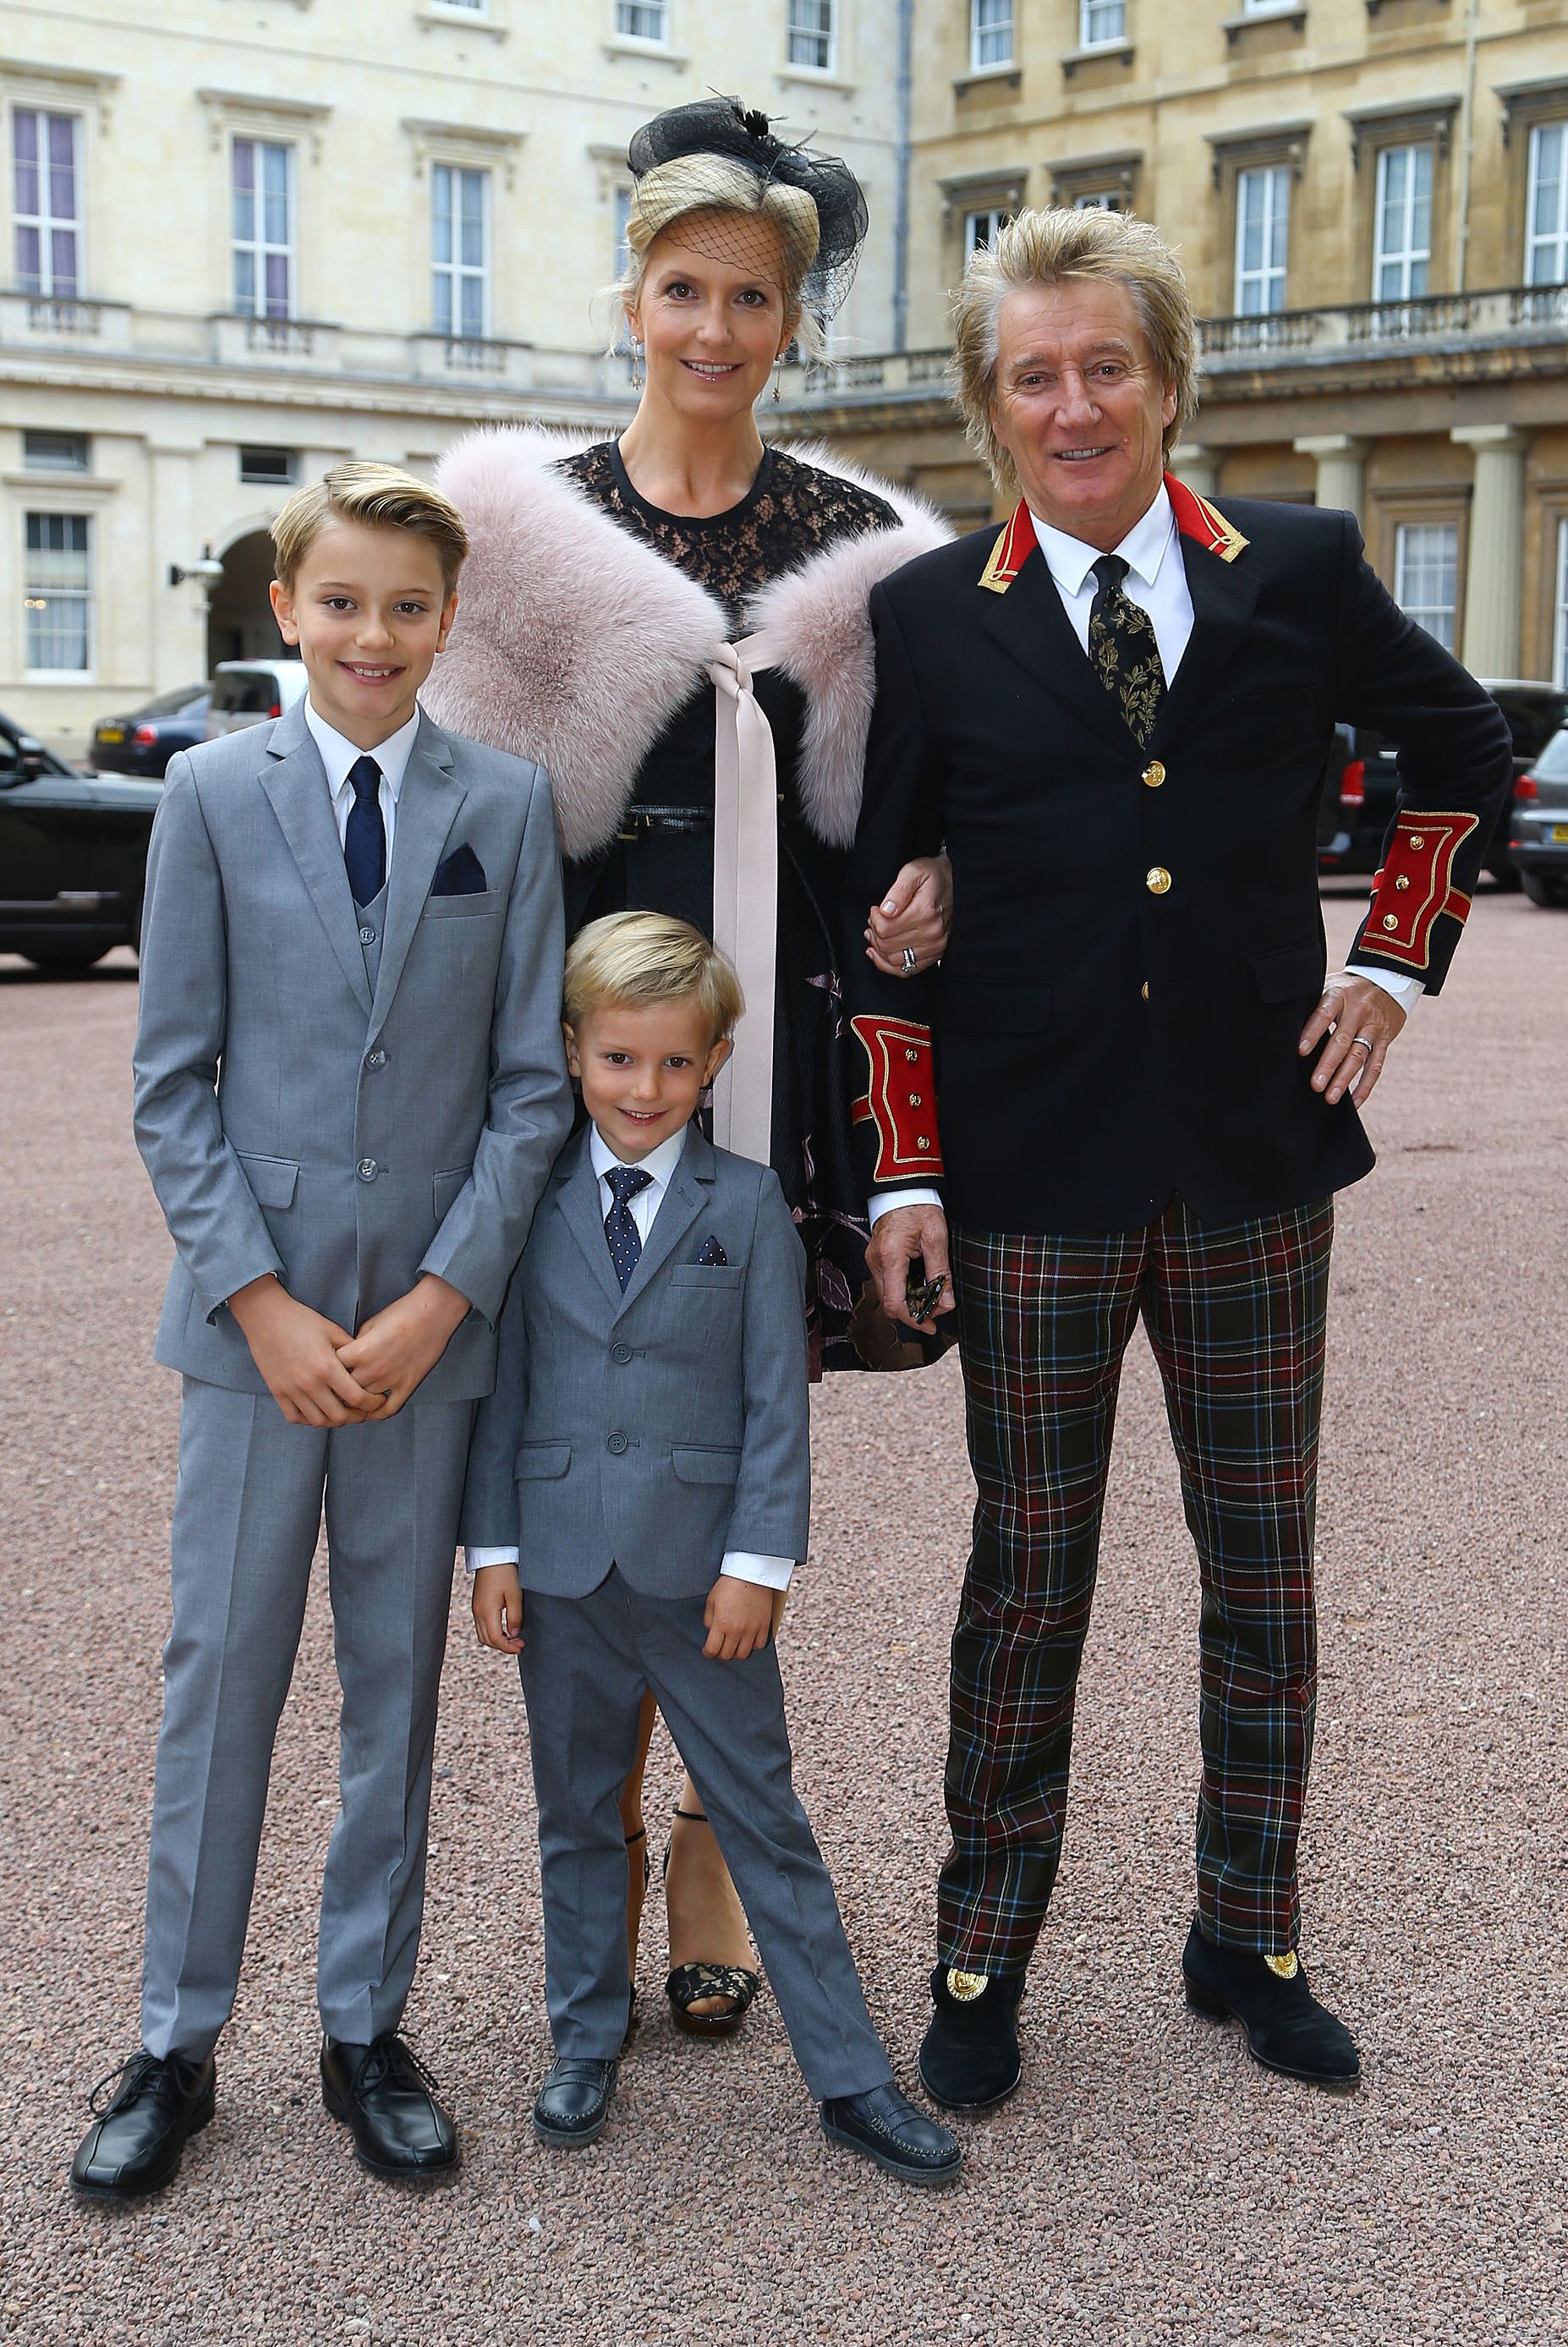 Rod Stewart and his wife Penny Lancaster with their children Alastair and Aiden in London in 2016 | Source: Getty Images